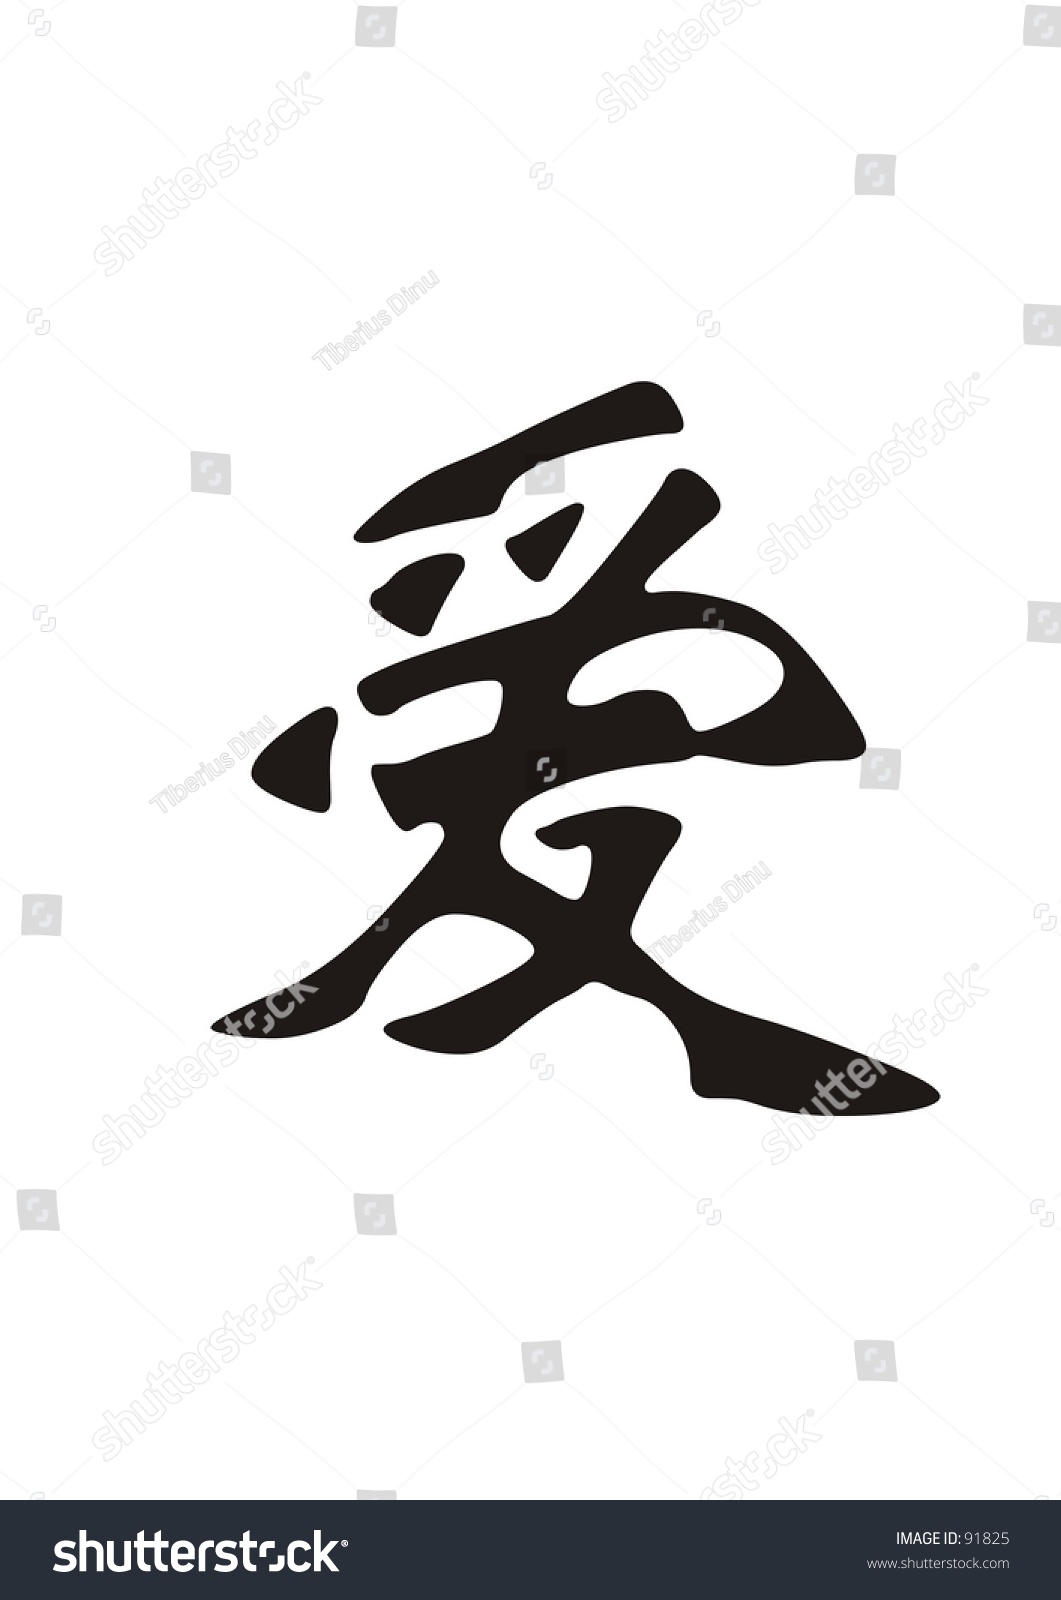 Chinese Character for Love - Royalty Free Stock Photo 91825 - Avopix.com